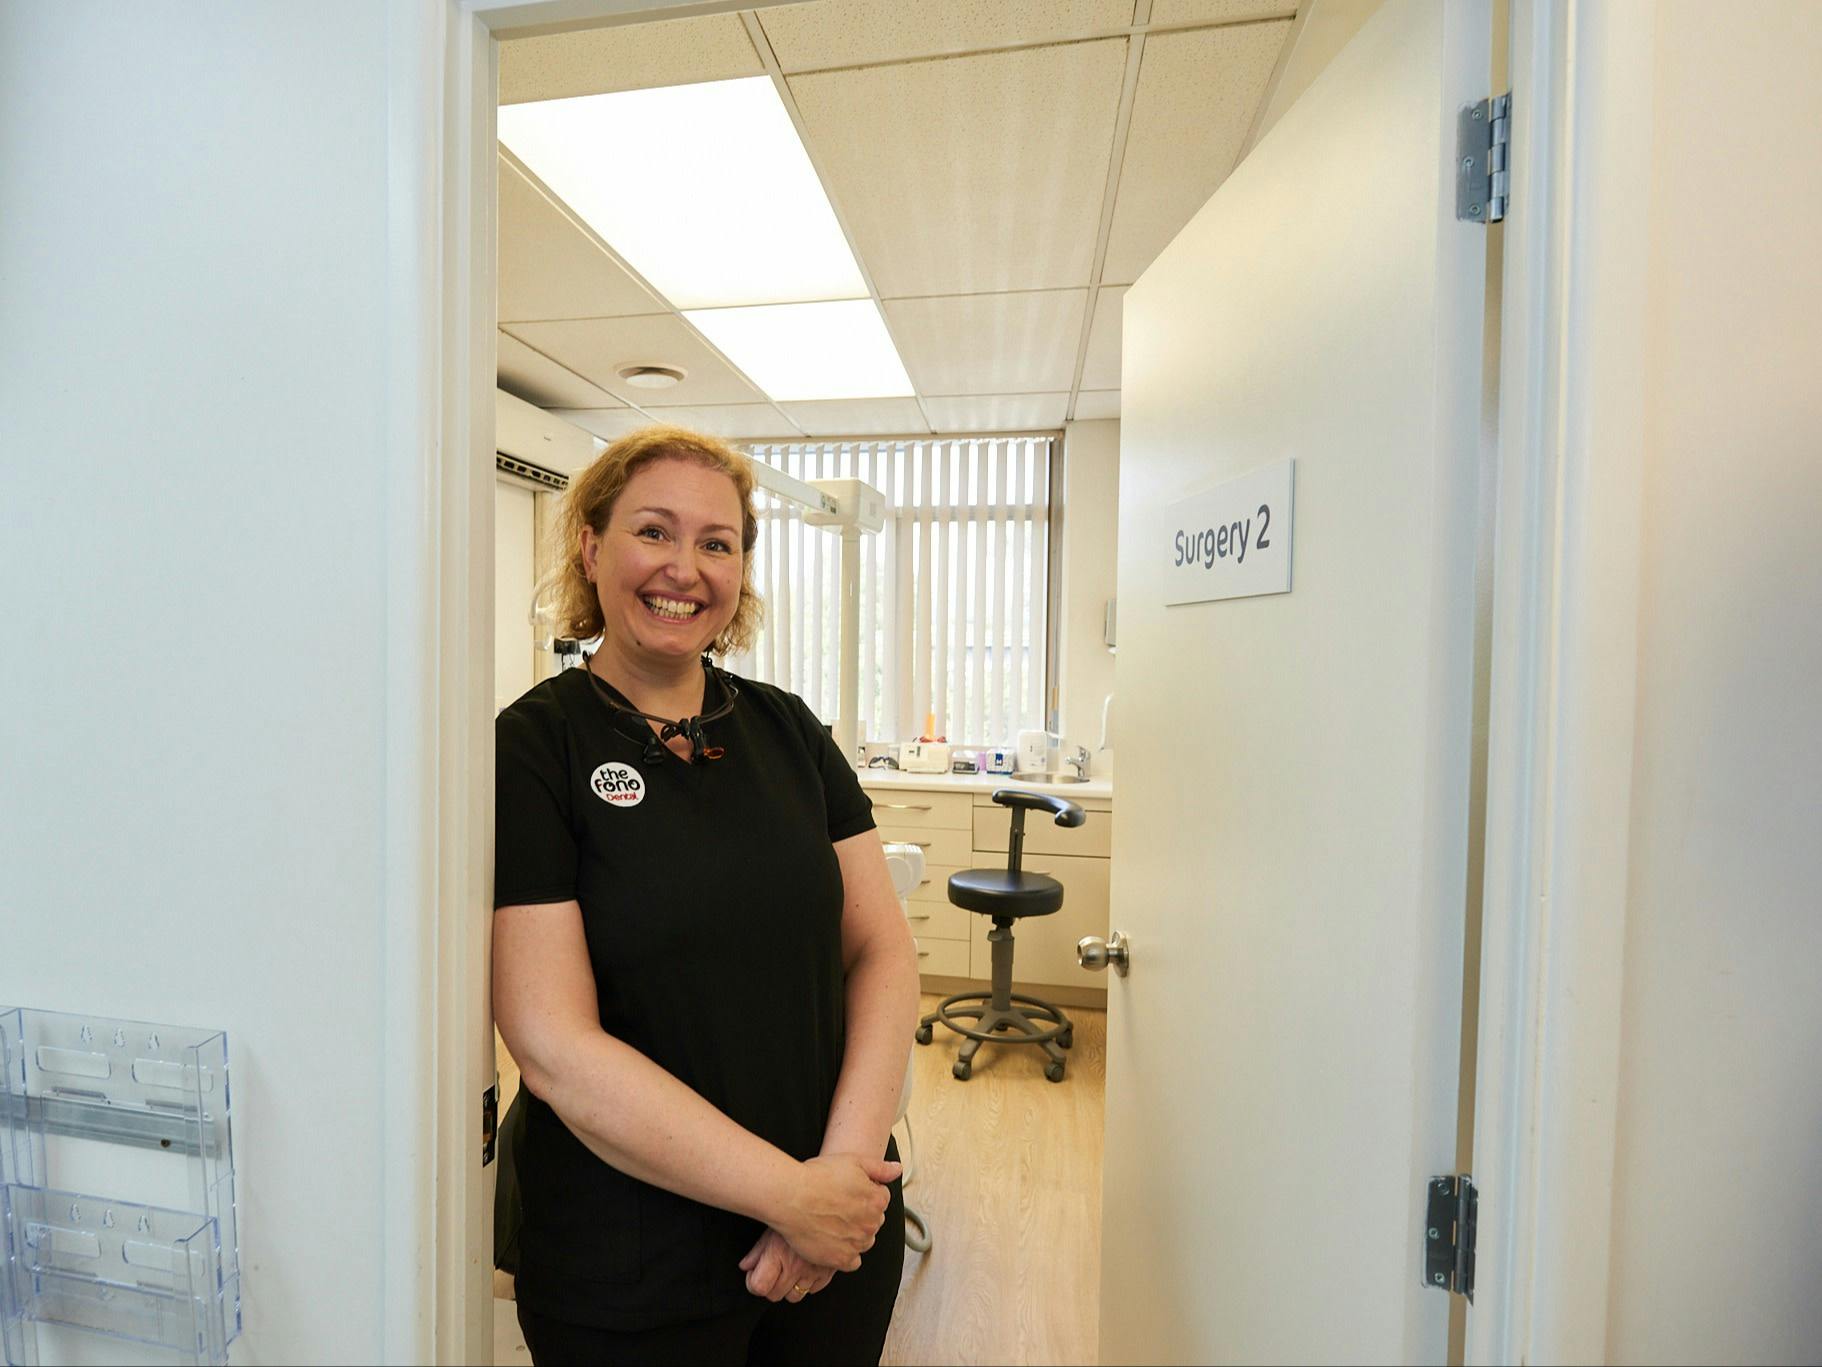 photo of smiling female in dental uniform standing by consult room